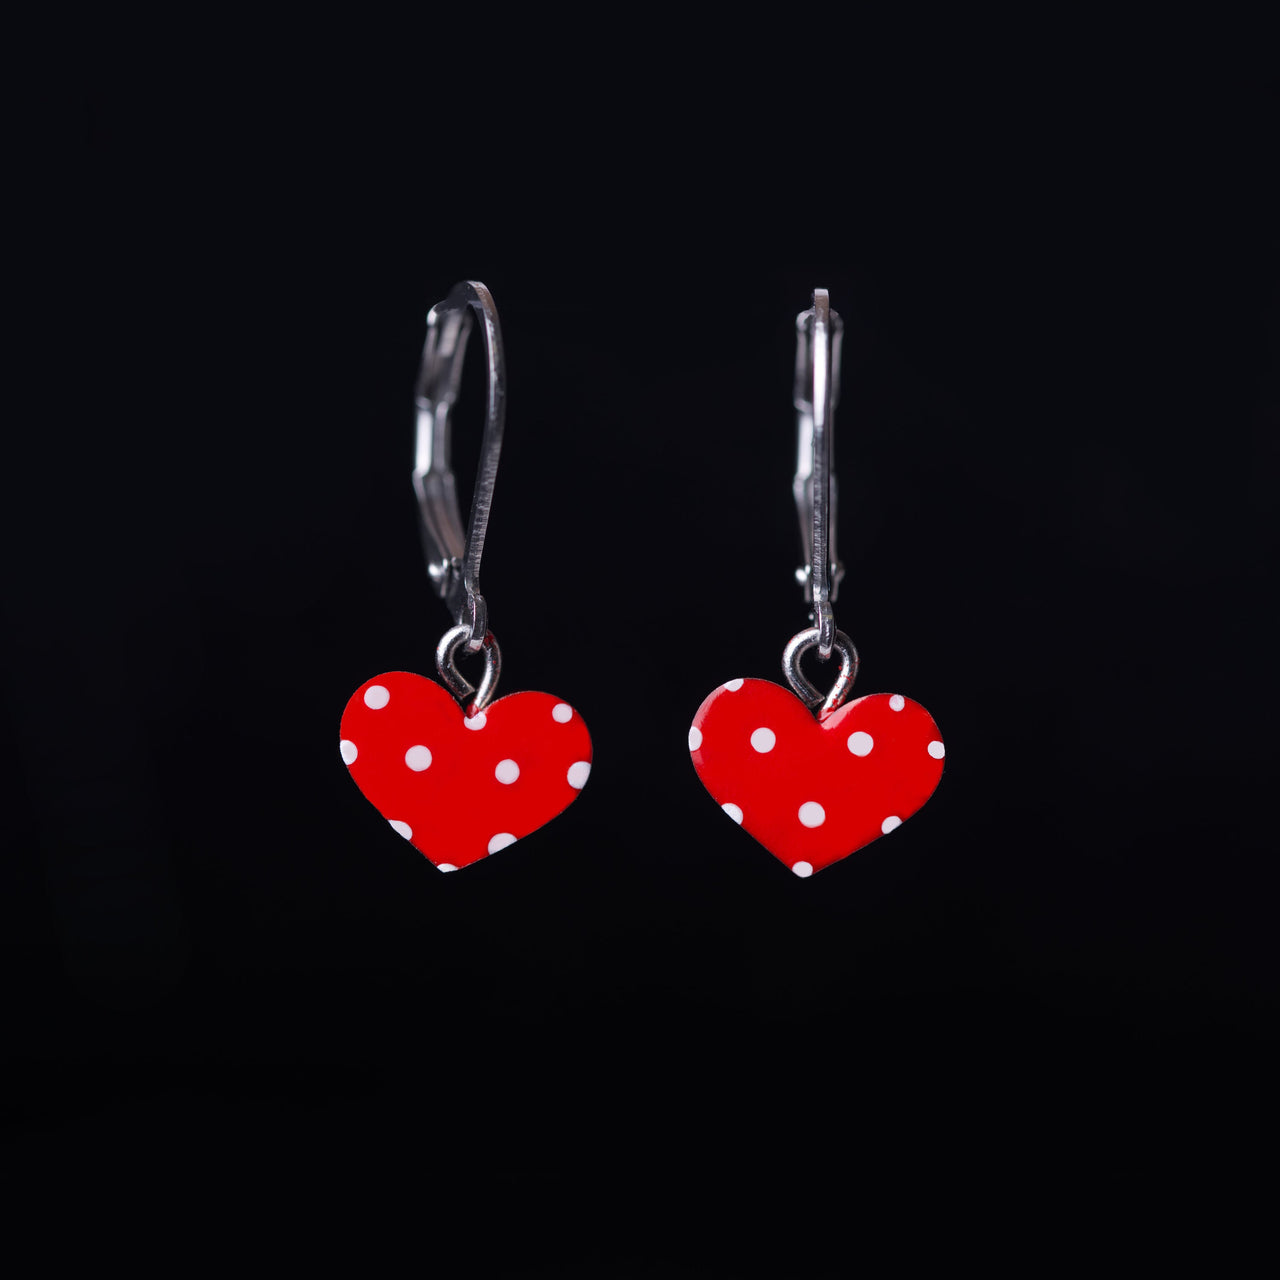 Red Heart Leverback Earrings with Polka Dots